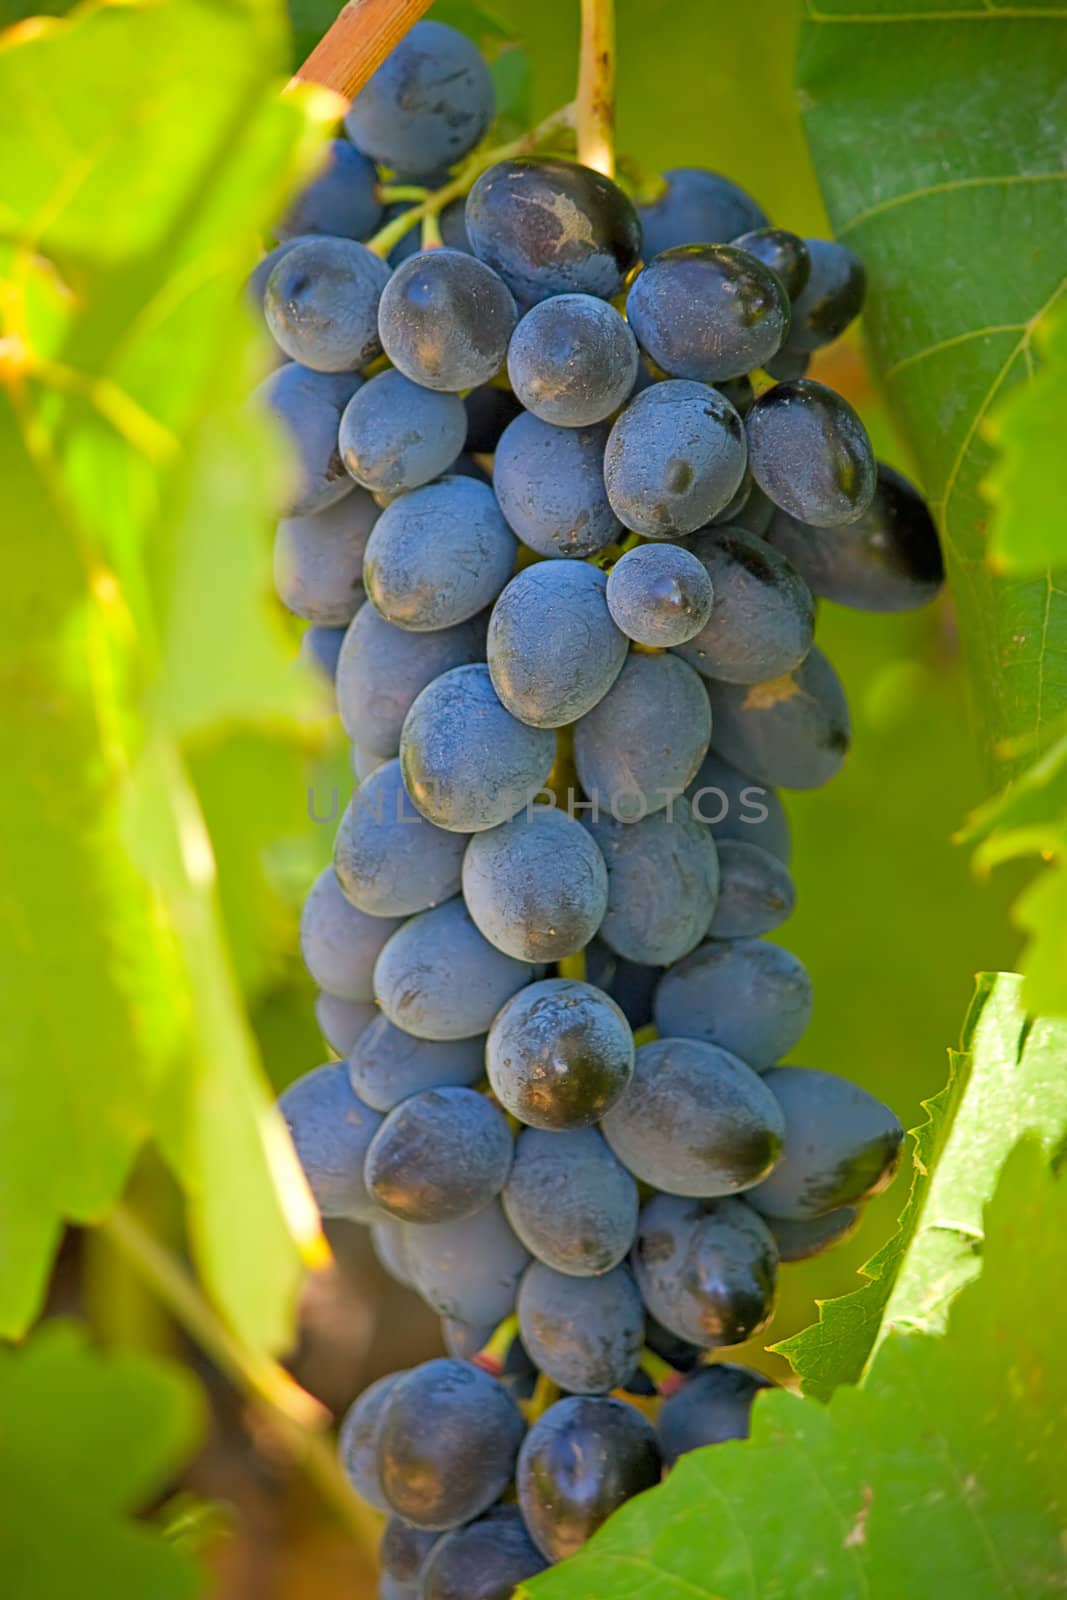 Bunch of dark grapes.An image with shallow depth of field.